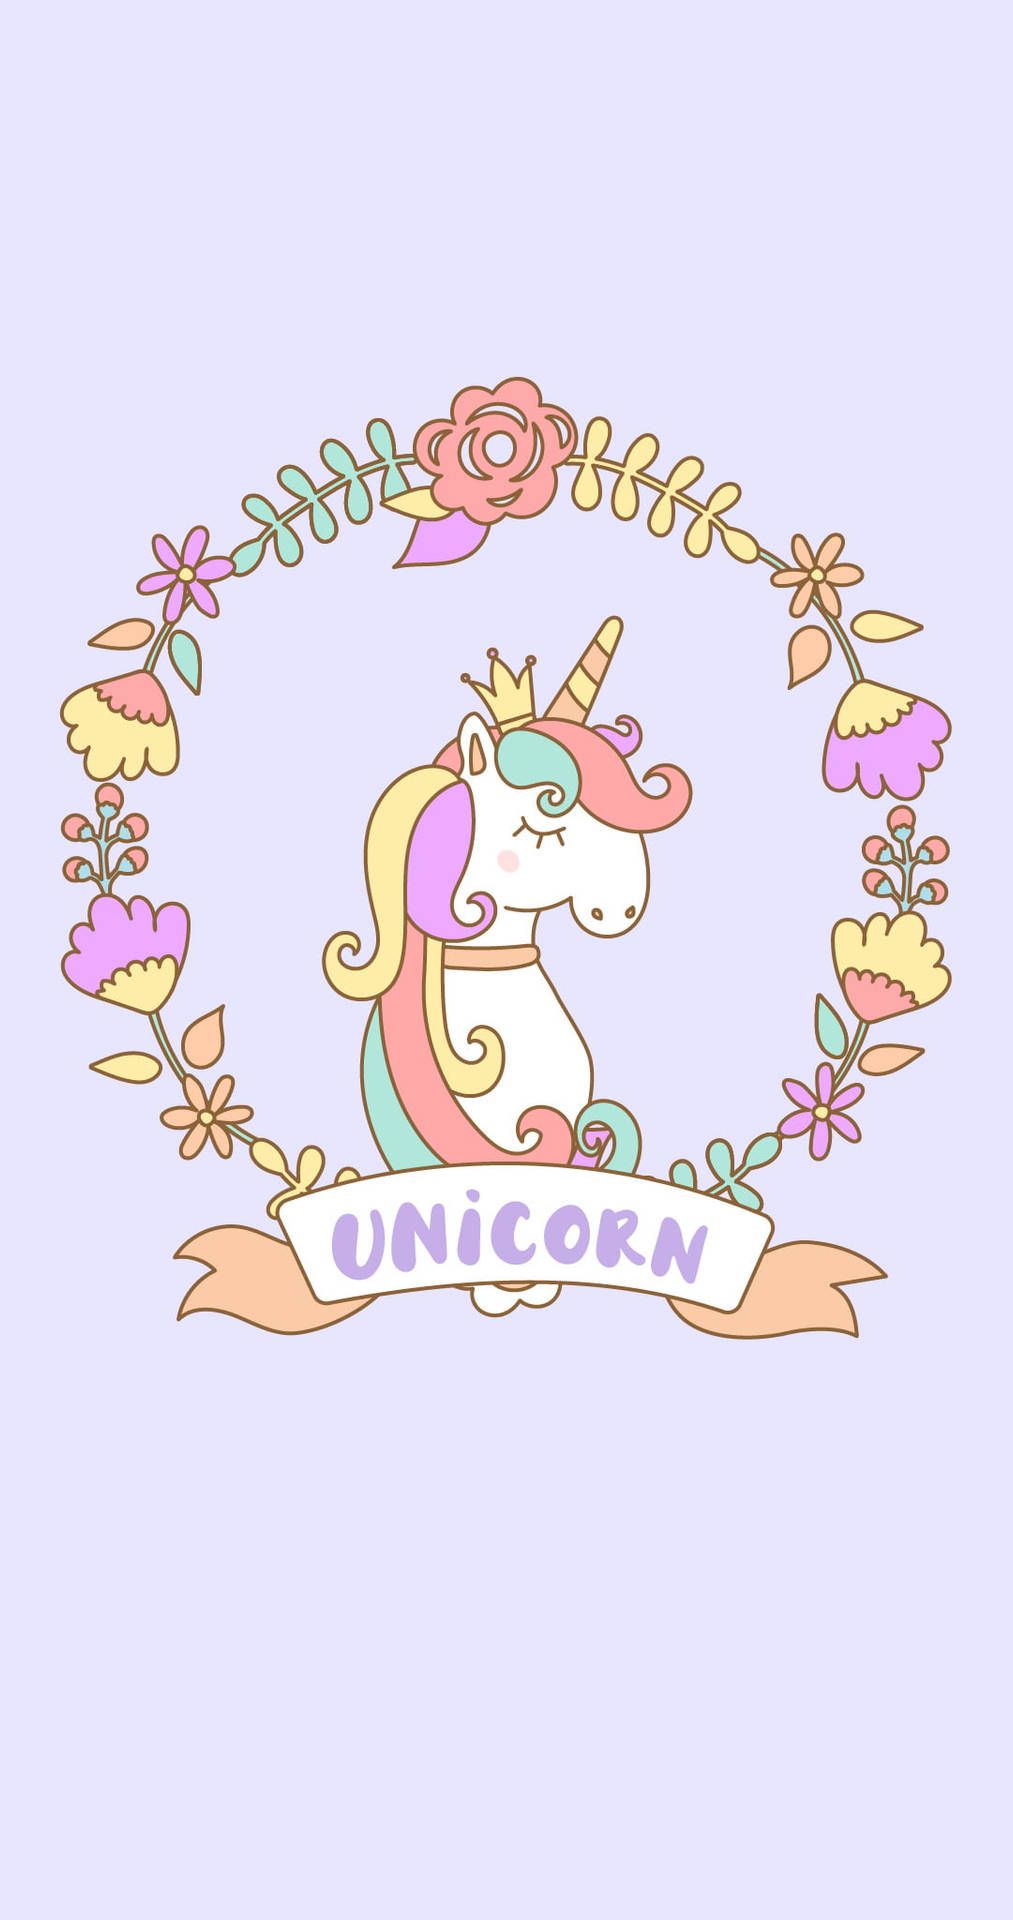 A cute unicorn with flowers and leaves around it - Unicorn